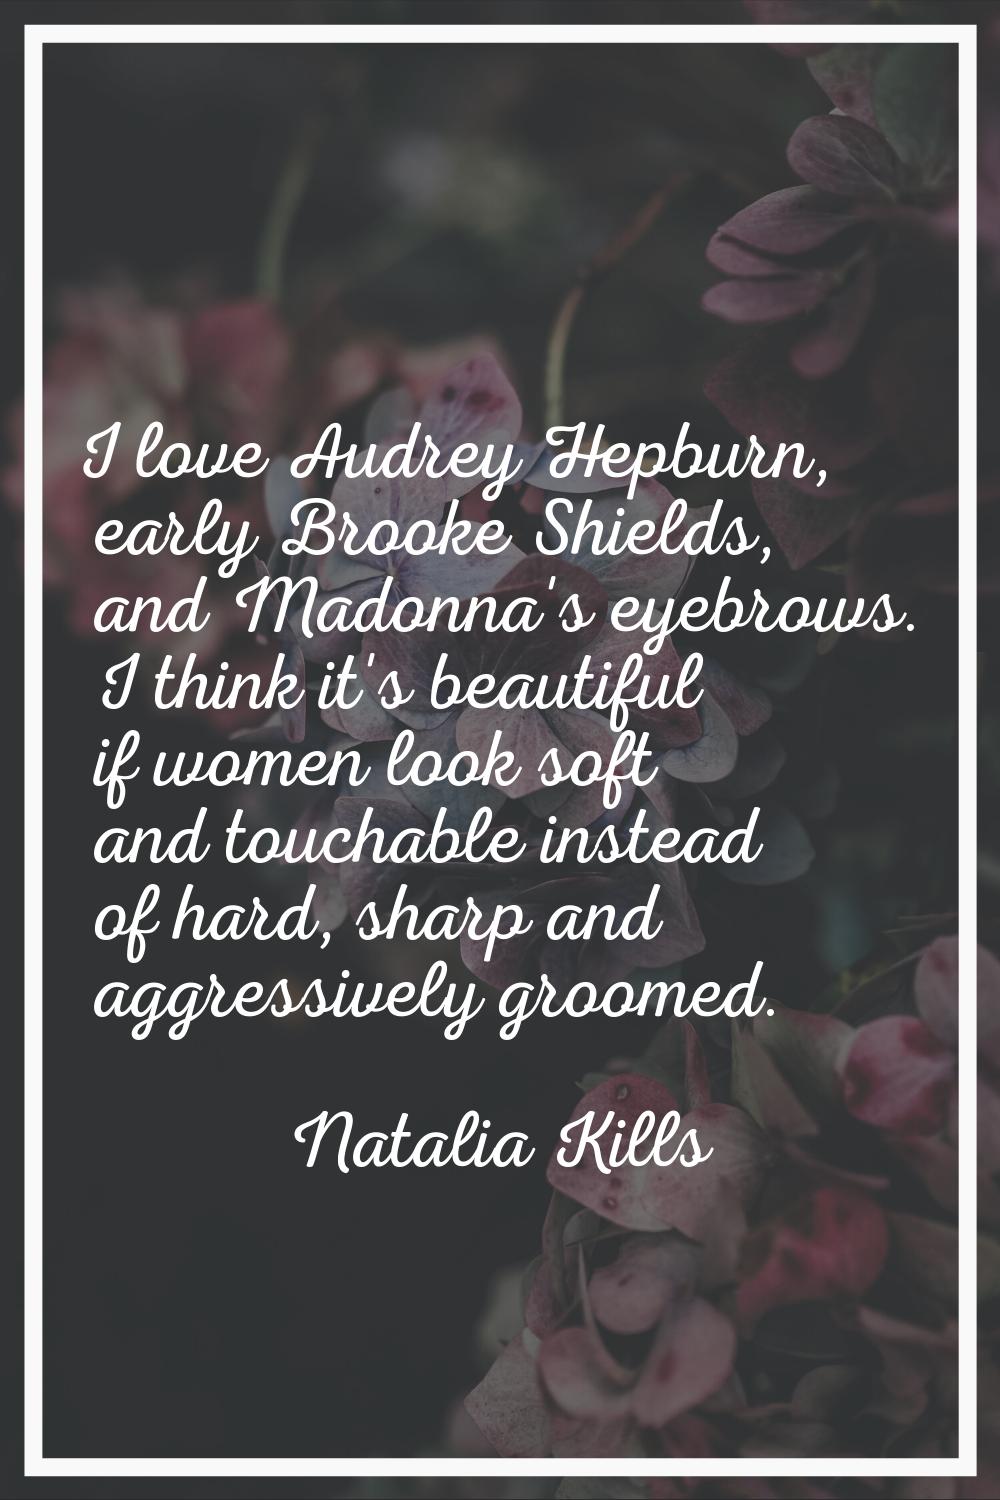 I love Audrey Hepburn, early Brooke Shields, and Madonna's eyebrows. I think it's beautiful if wome